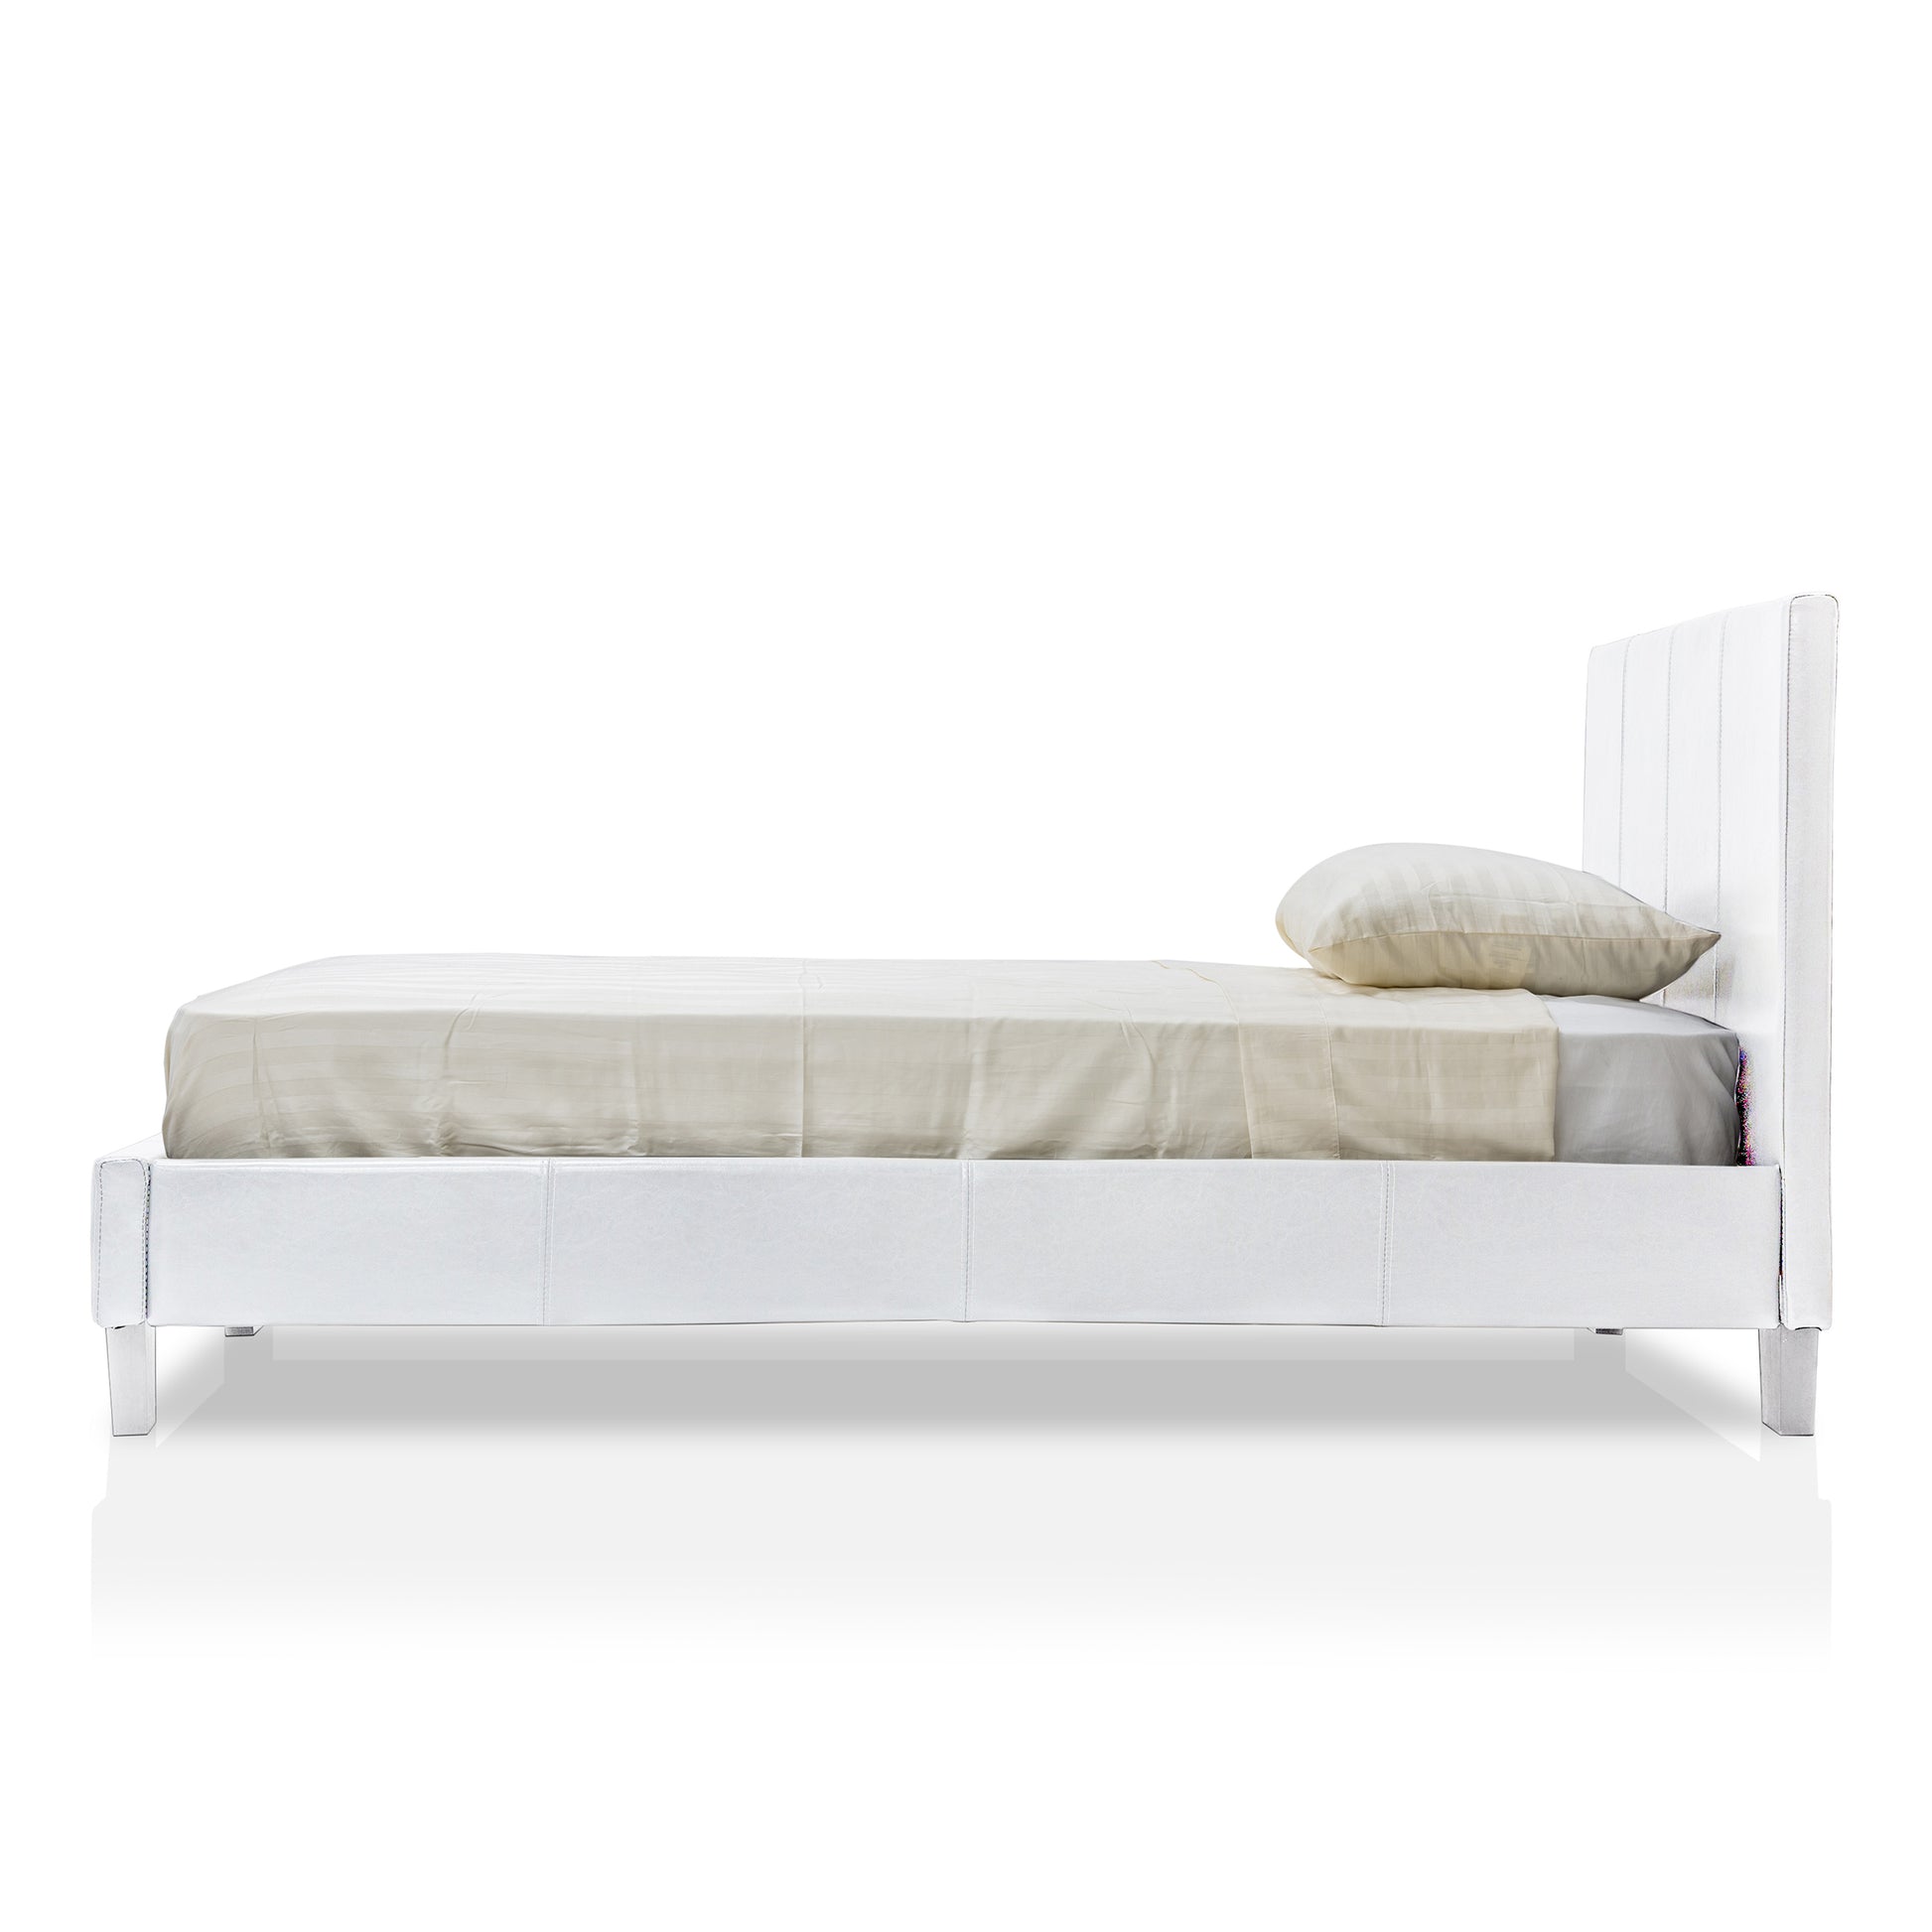 Front-facing side view of a contemporary white faux leather full platform bed with linens on a white background